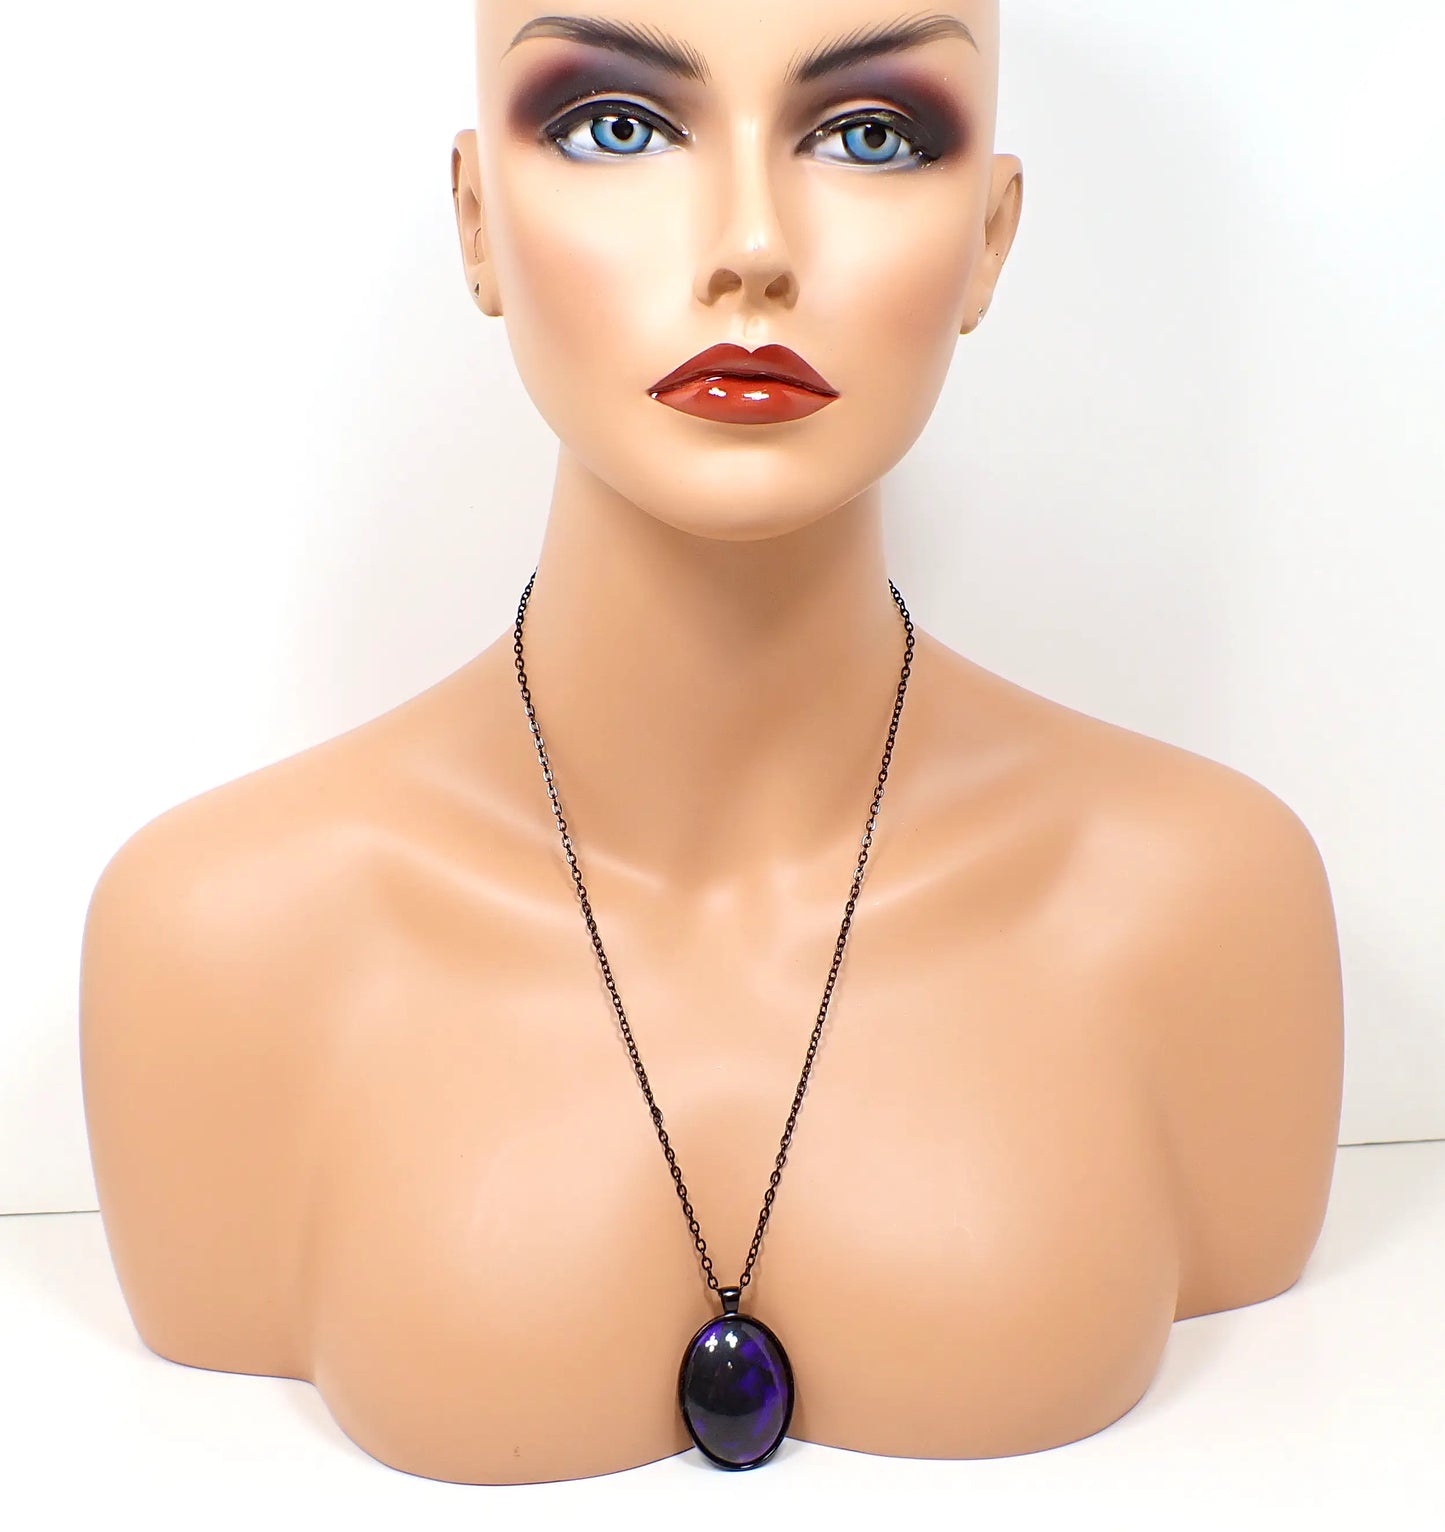 Large Goth Handmade Black and Purple Resin Oval Pendant Necklace